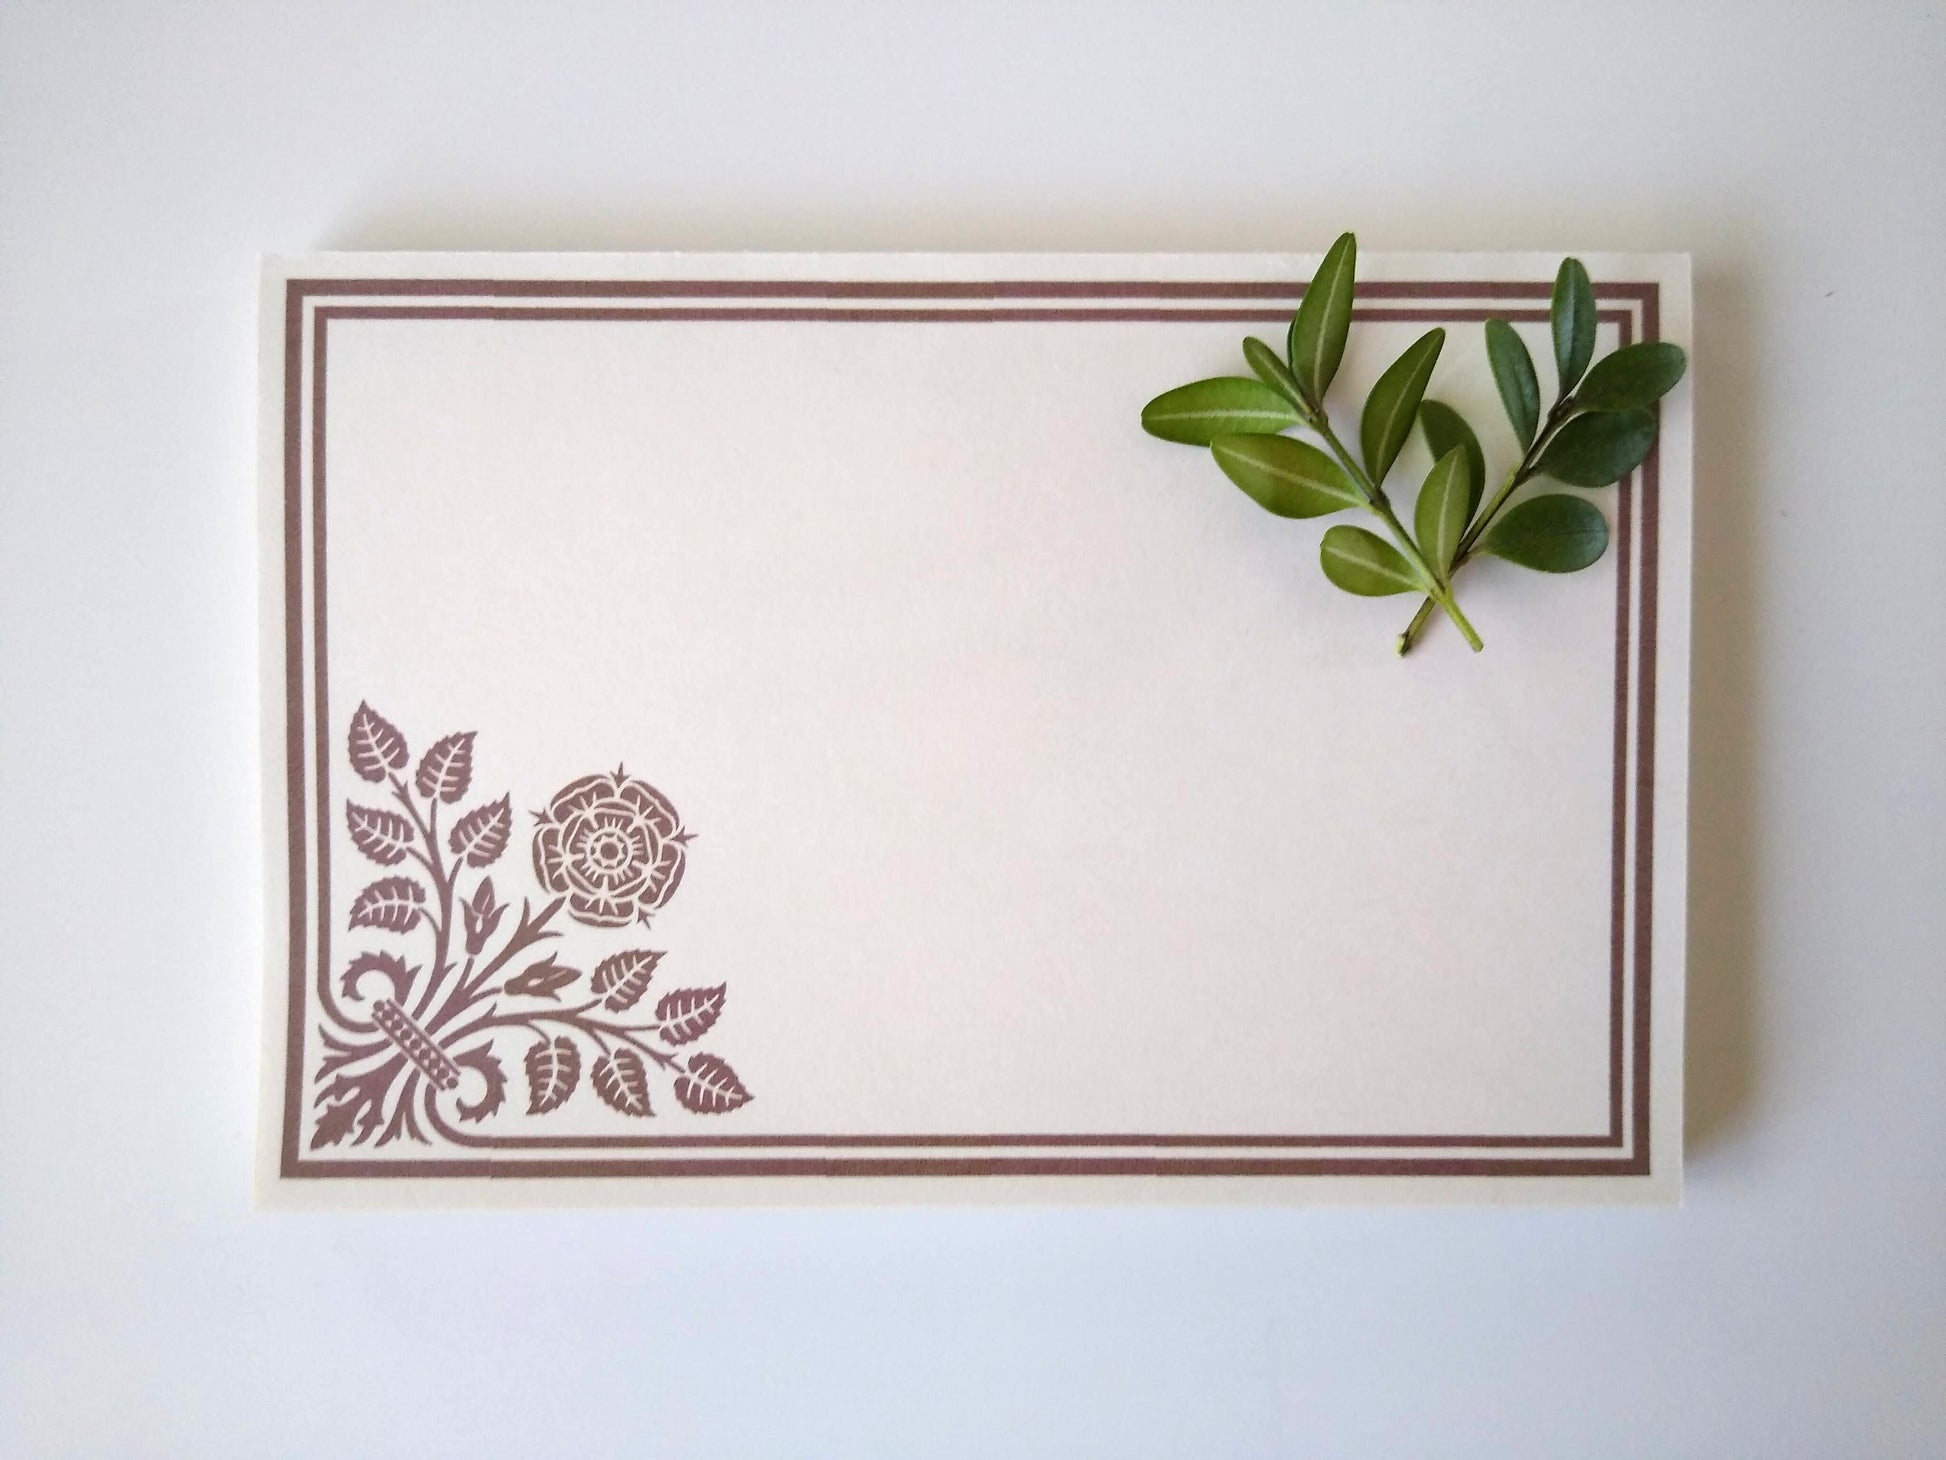 Single notepad with a stylized Peony design in the lower left corner. There is a double line border around the whole notepad. Two small sprigs of leaves rest on the upper right hand corner.